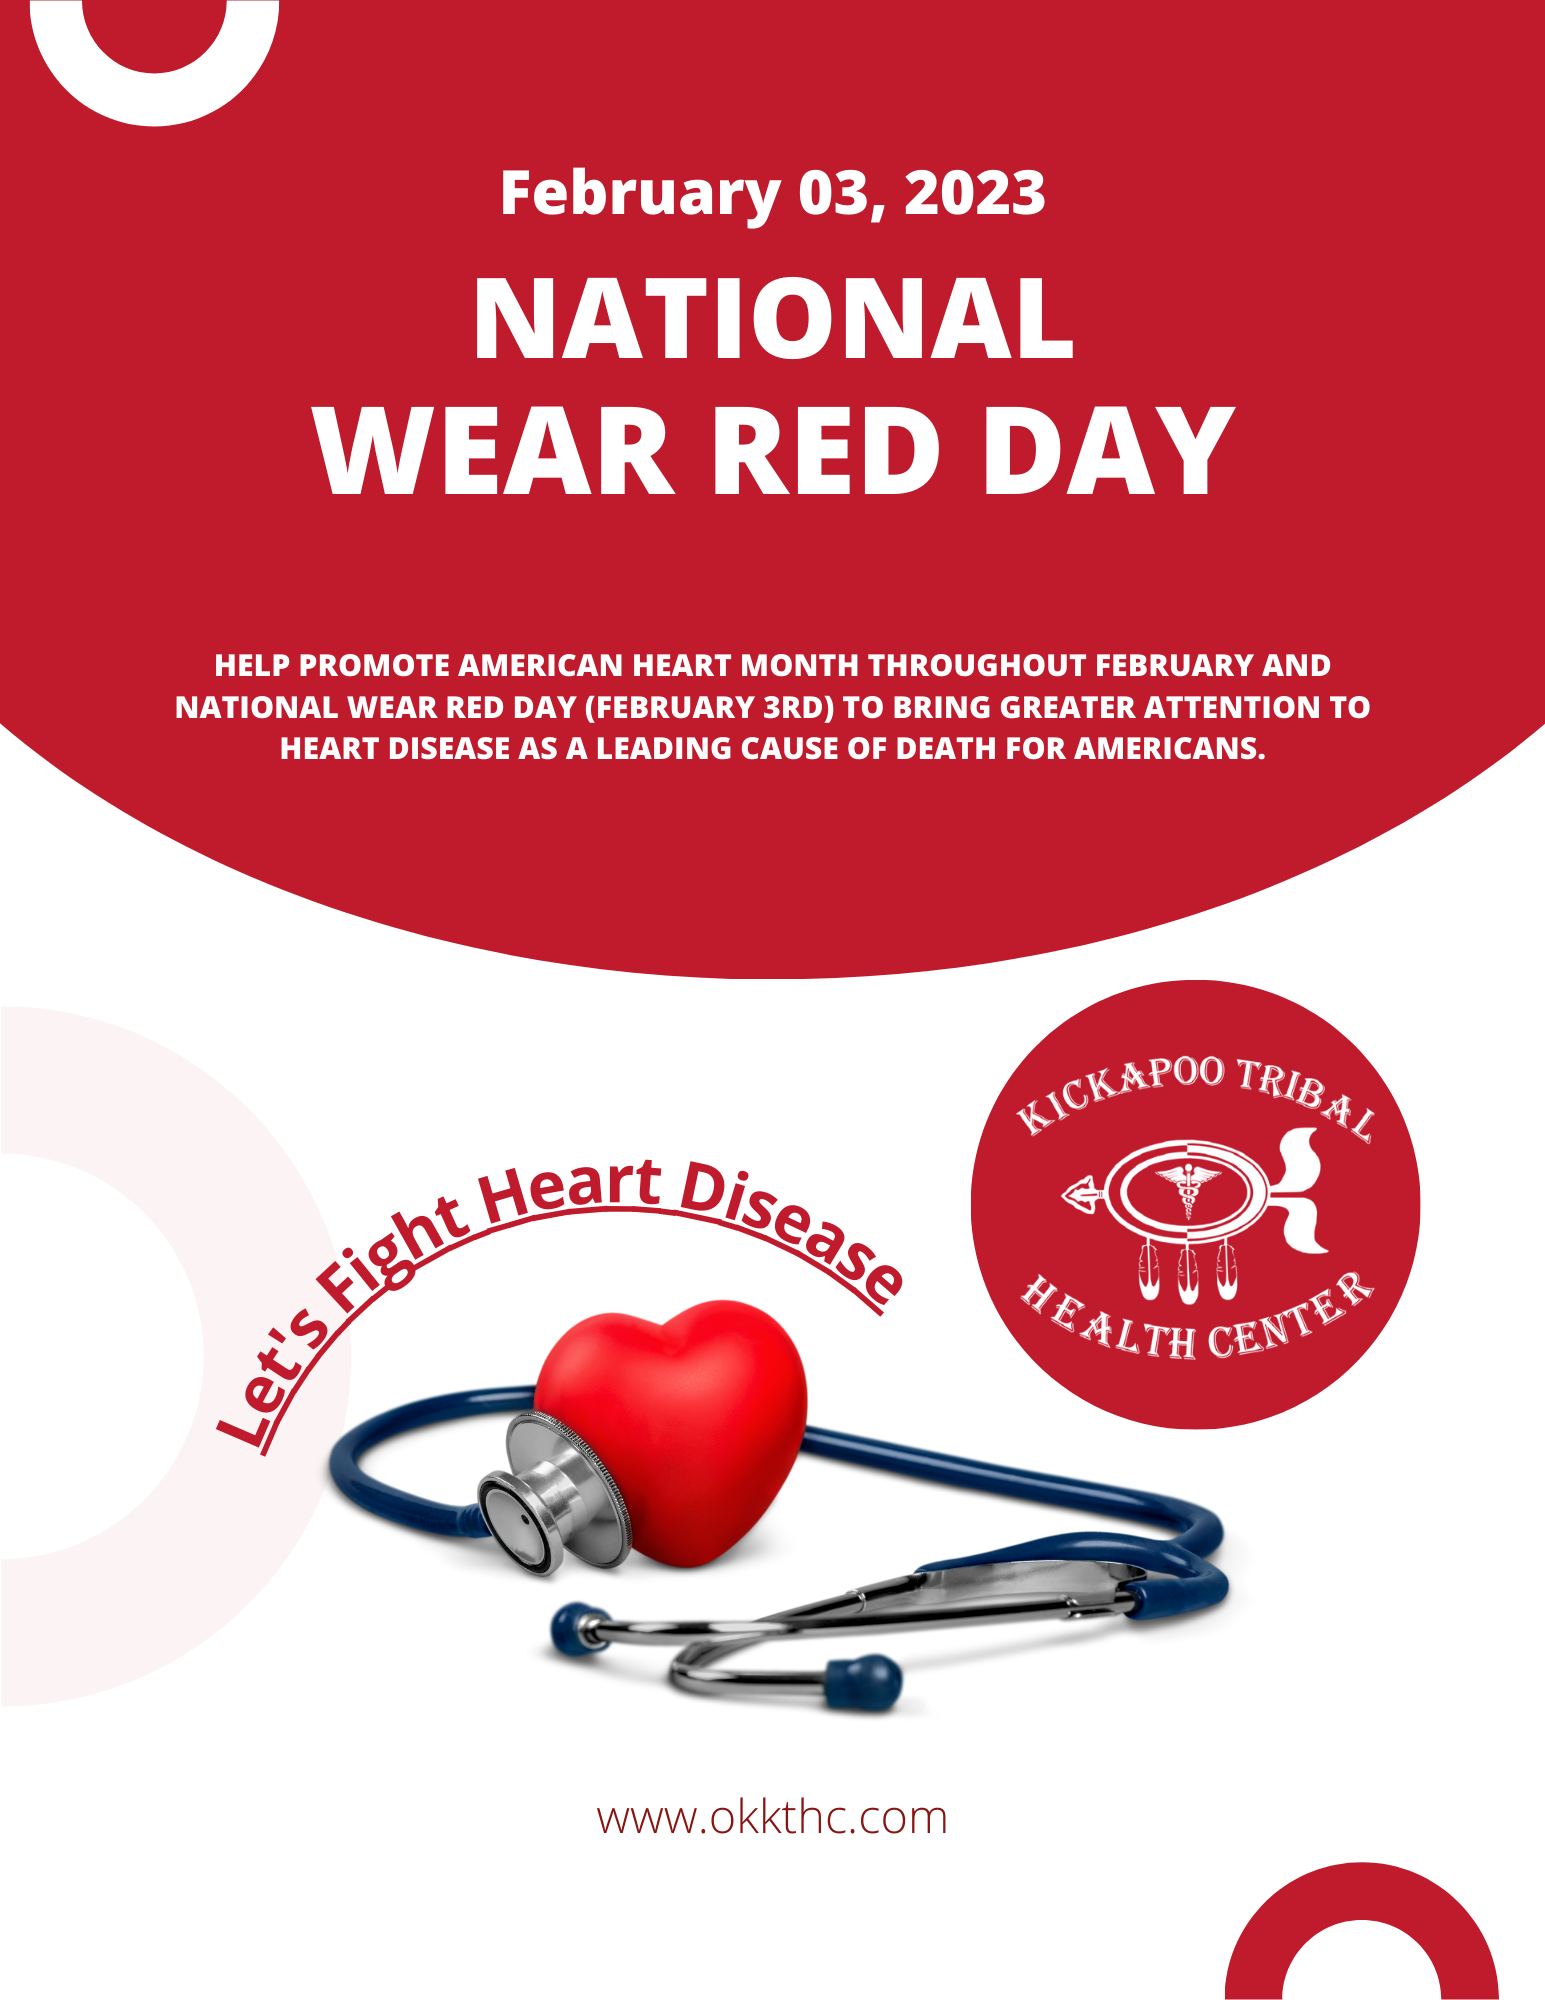 NATIONAL WEAR RED DAY Kickapoo Tribal Health Center